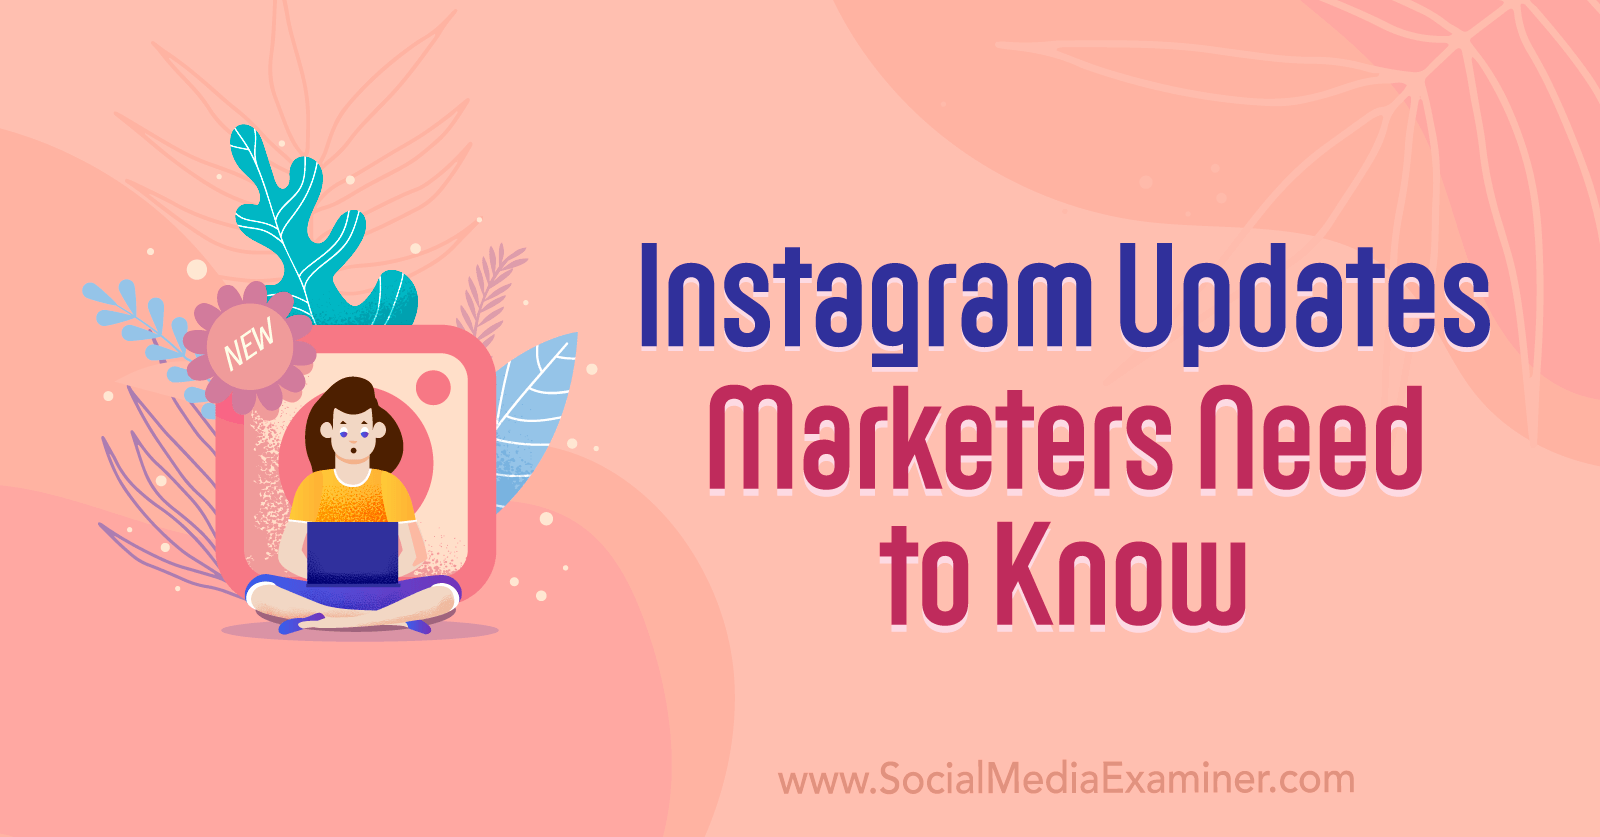 Instagram Updates Marketers Need to Know by Social Media Examiner